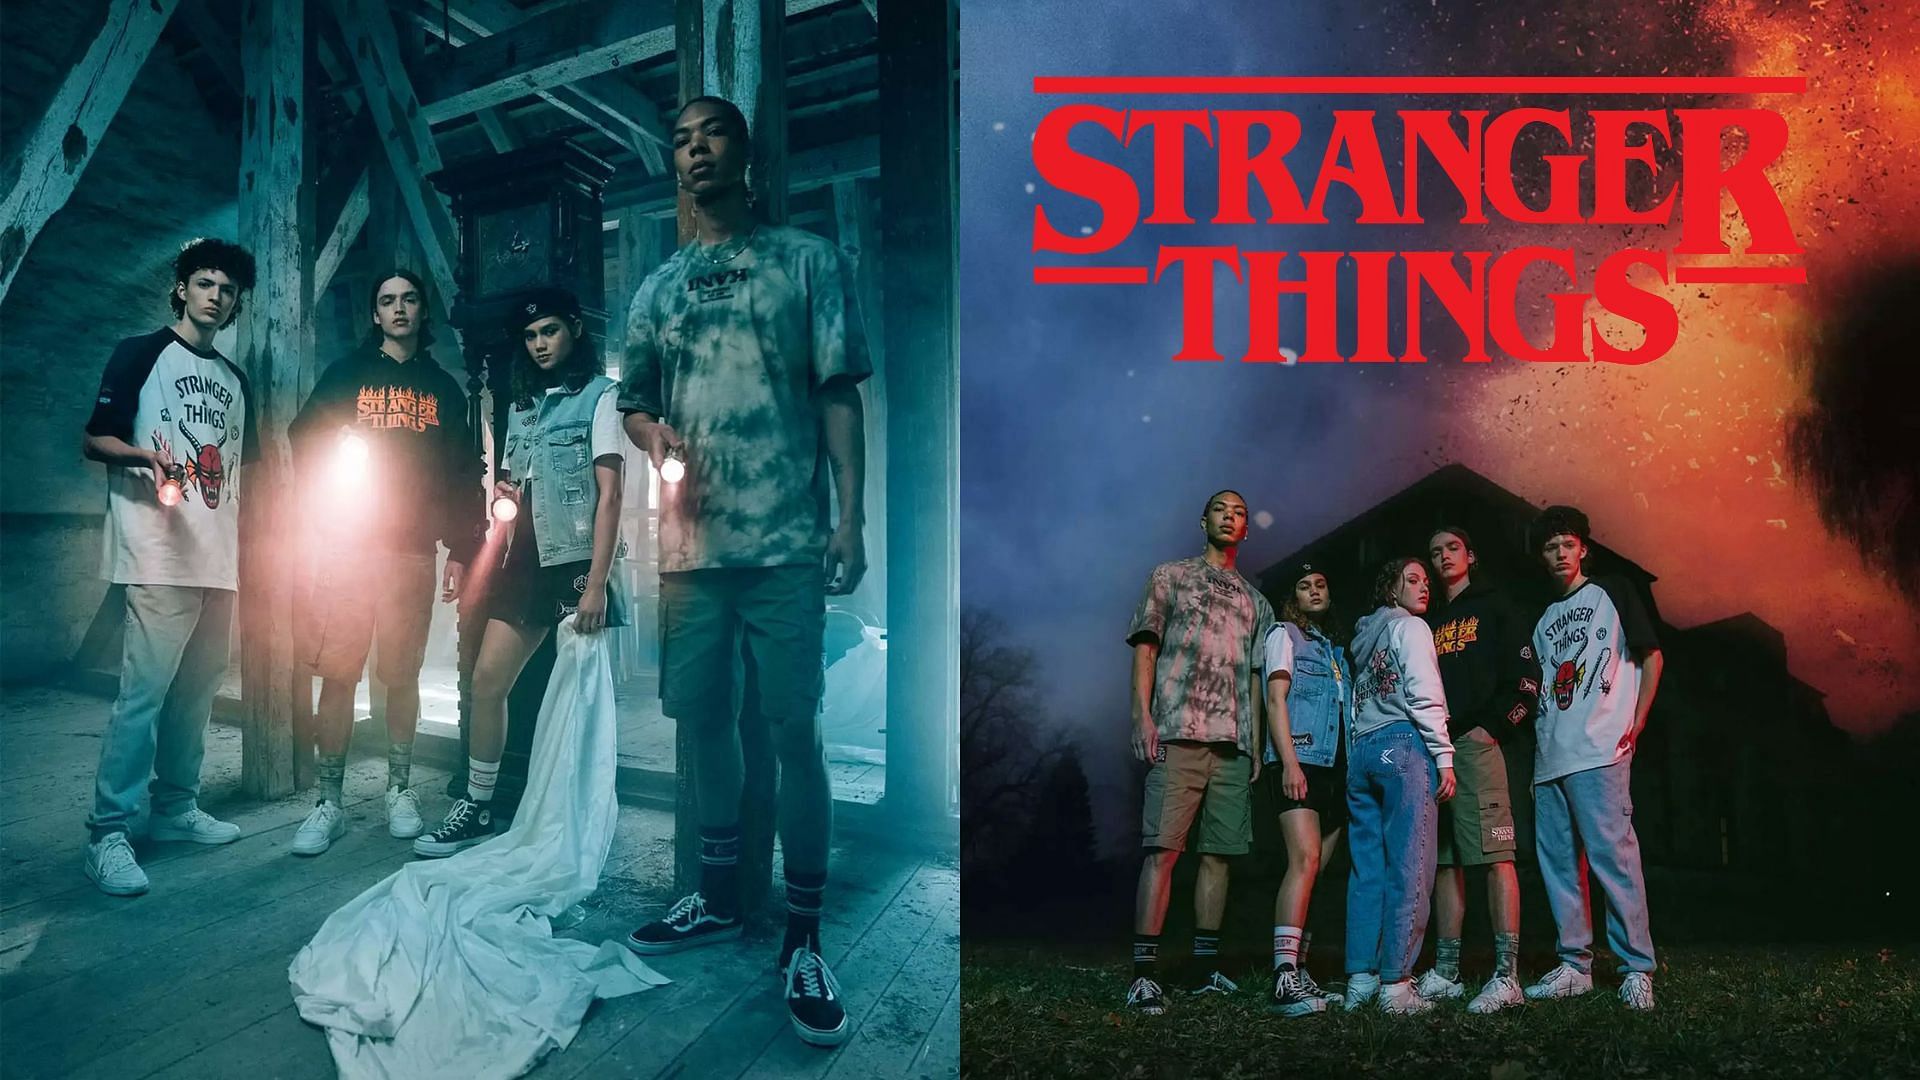 Some of the releases from the Karl Kani x Stranger Things collab (Image via Instagram/@karlkaniclothing)